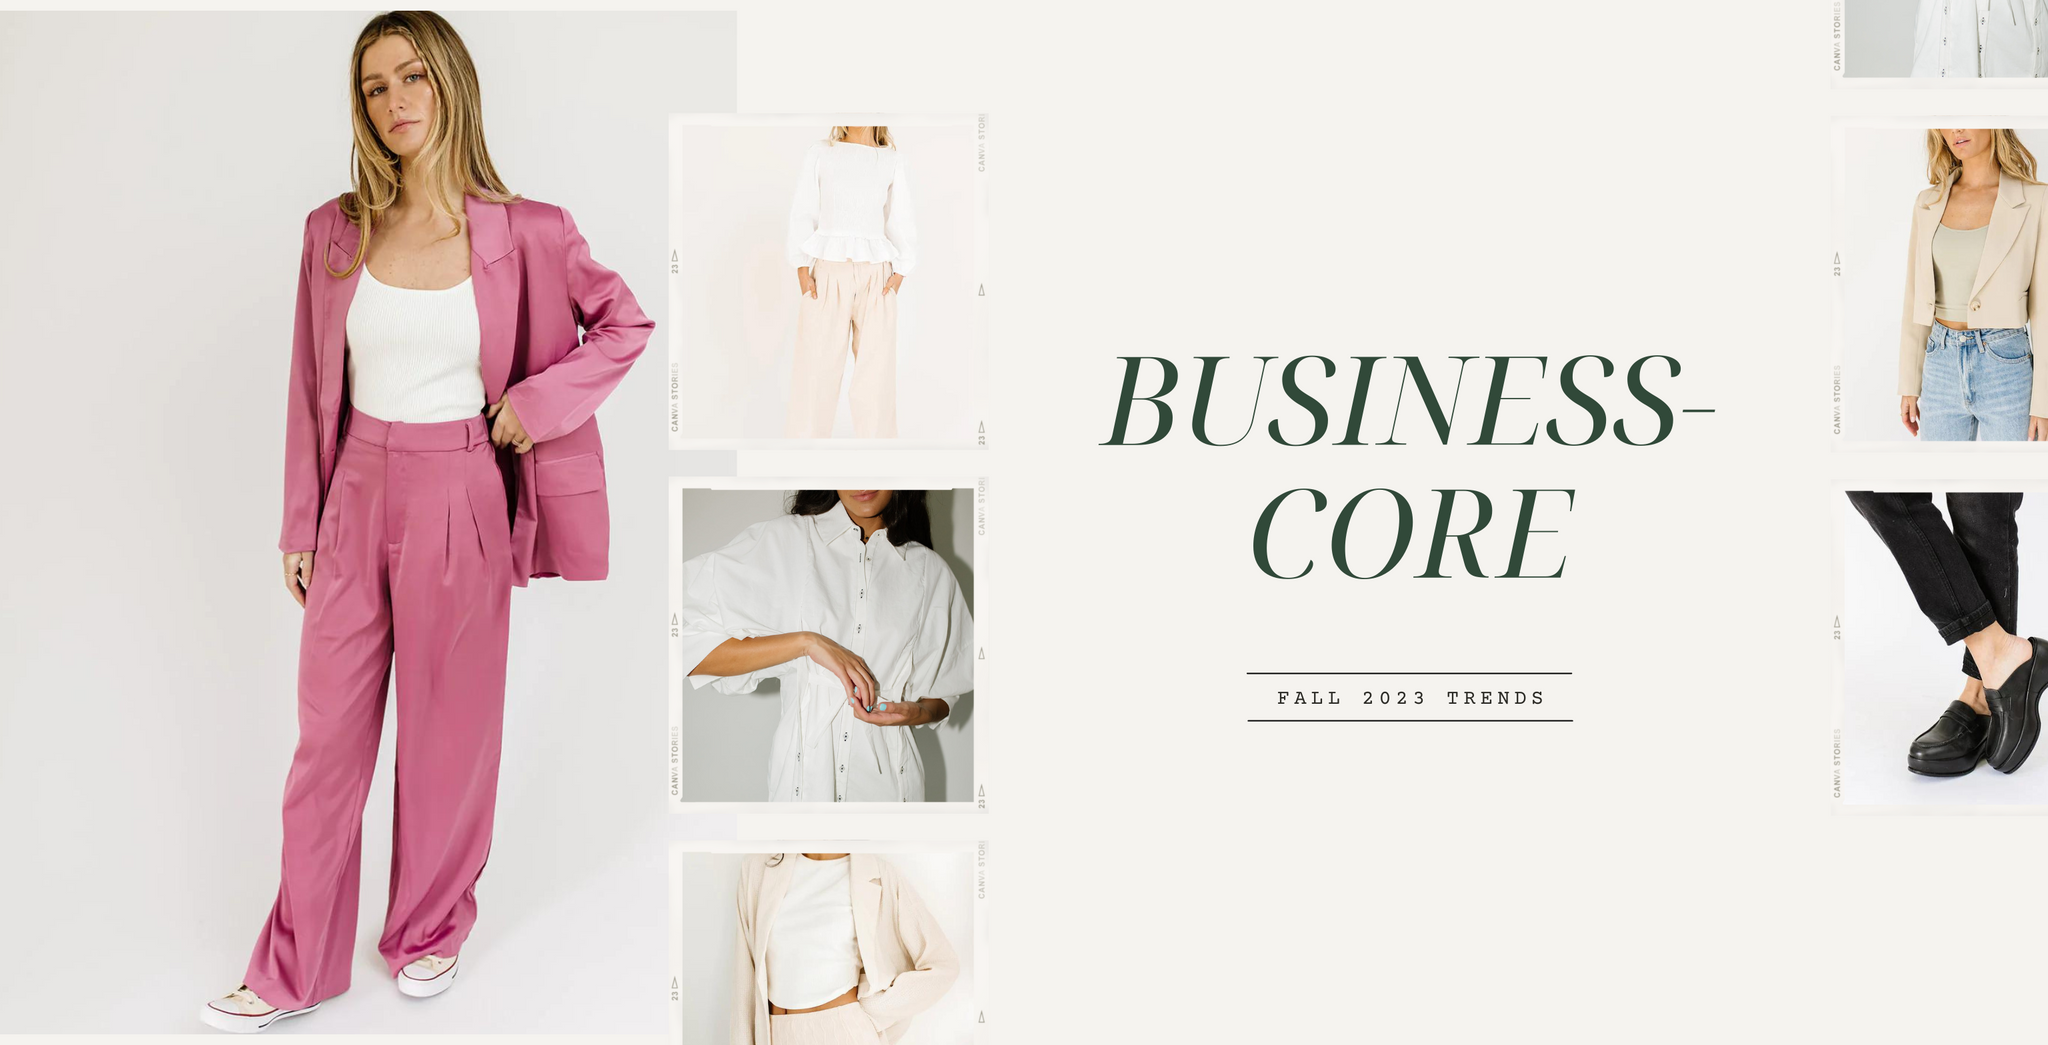 fall 2023 fashion trends - business core